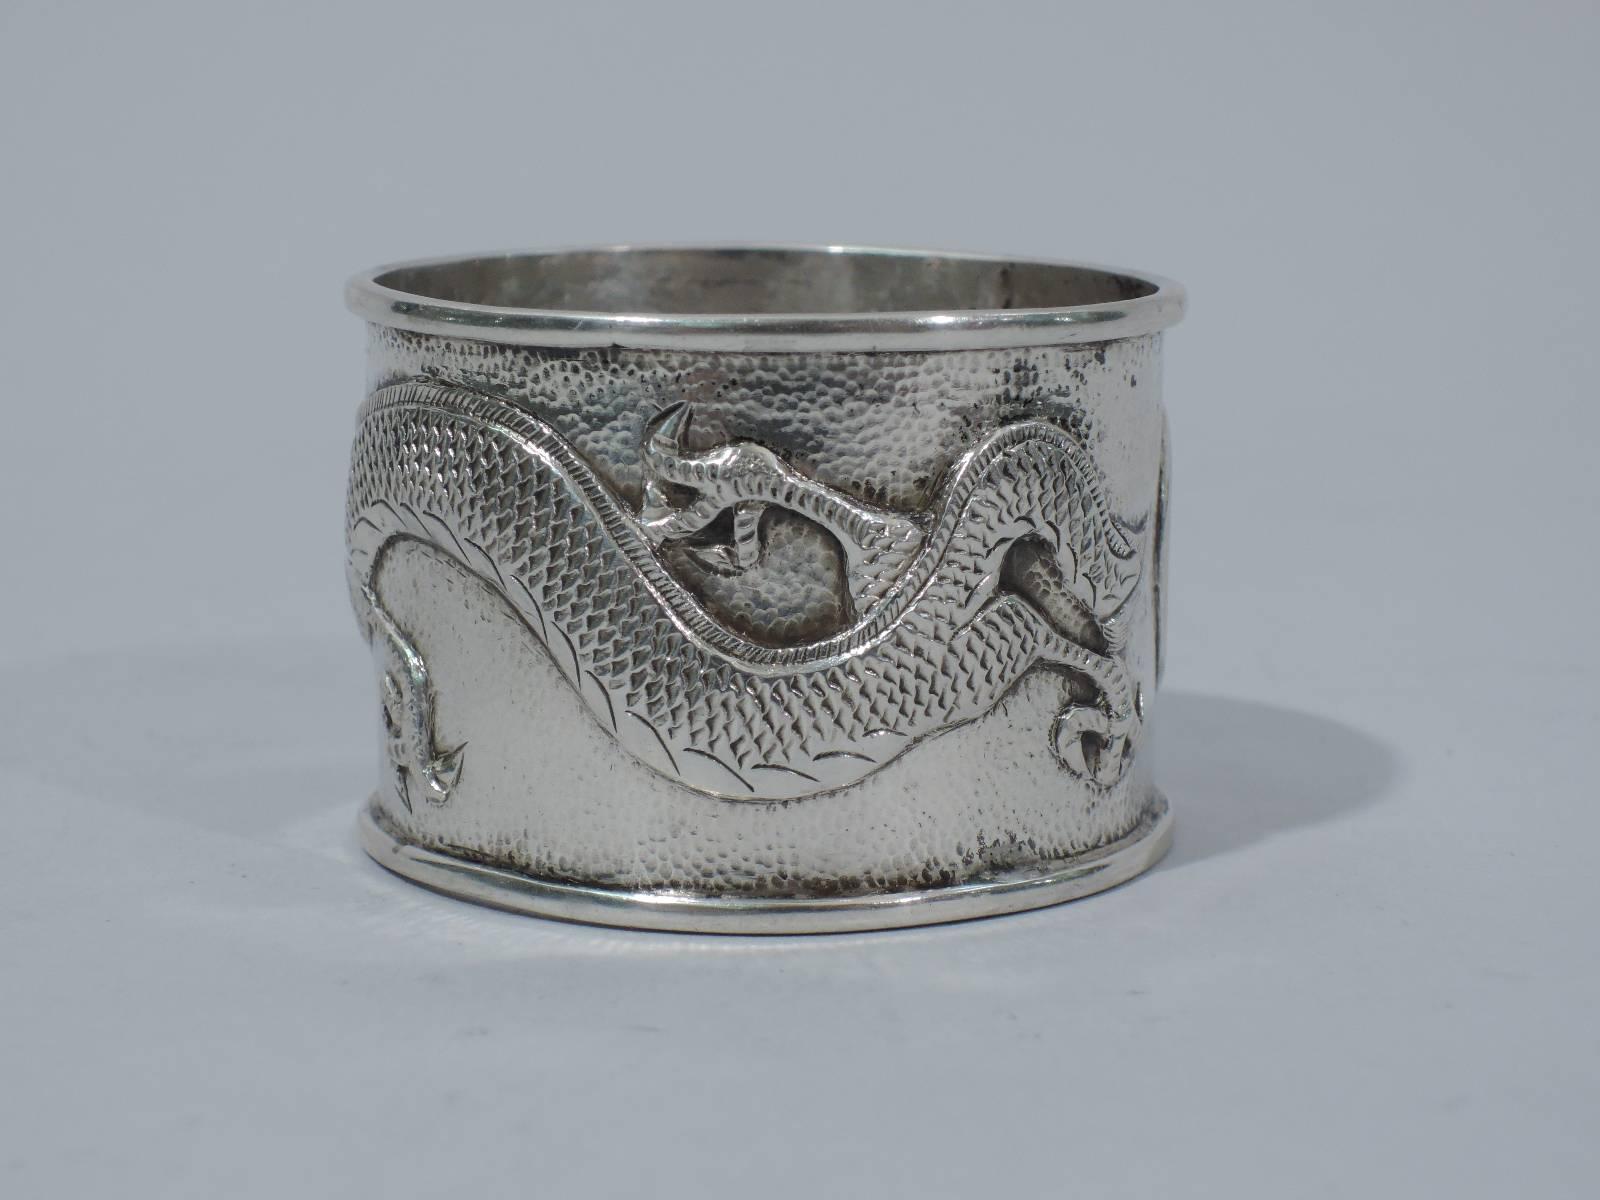 19th Century Chinese Export Silver Napkin Ring with Dragon